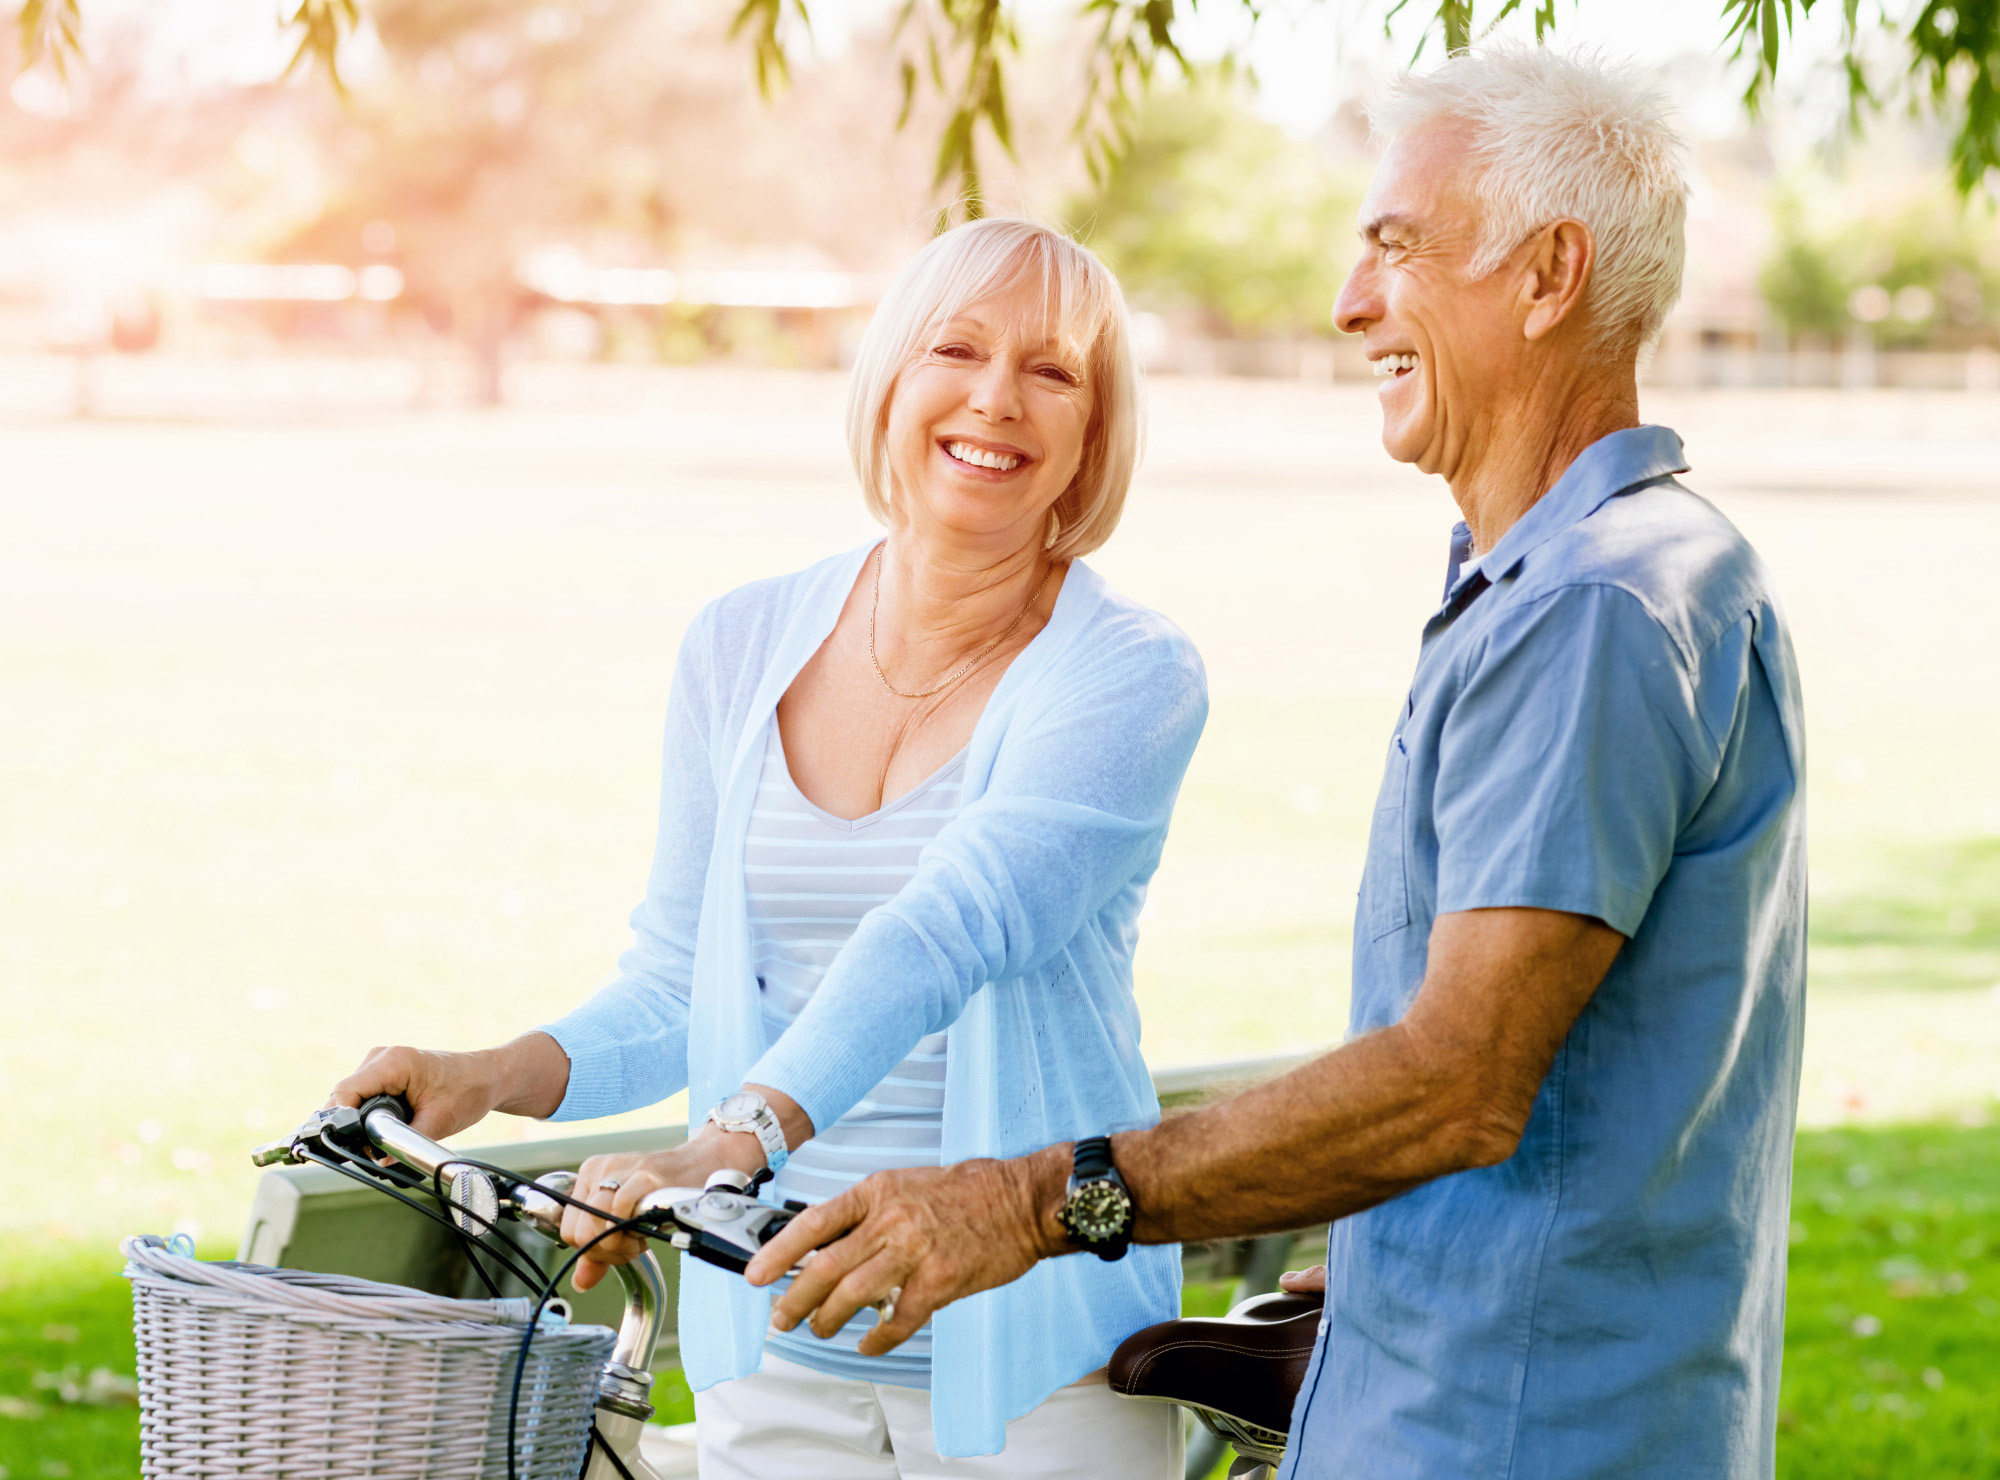 Mature Man and Woman with Bikes